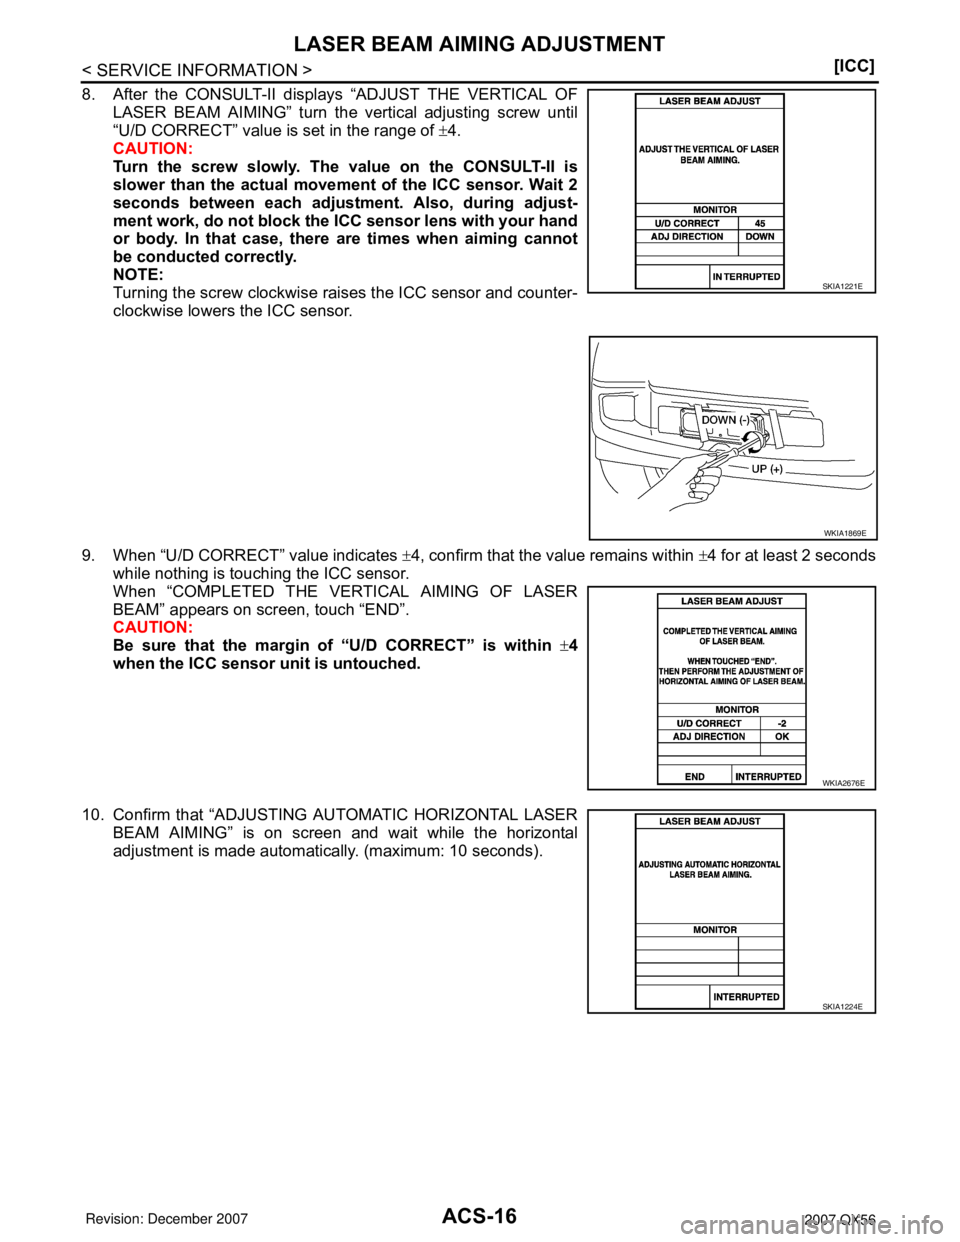 INFINITI QX56 2007  Factory Service Manual ACS-16
< SERVICE INFORMATION >[ICC]
LASER BEAM AIMING ADJUSTMENT
8. After the CONSULT-II displays “ADJUST THE VERTICAL OF
LASER BEAM AIMING” turn the vertical adjusting screw until
“U/D CORRECT�